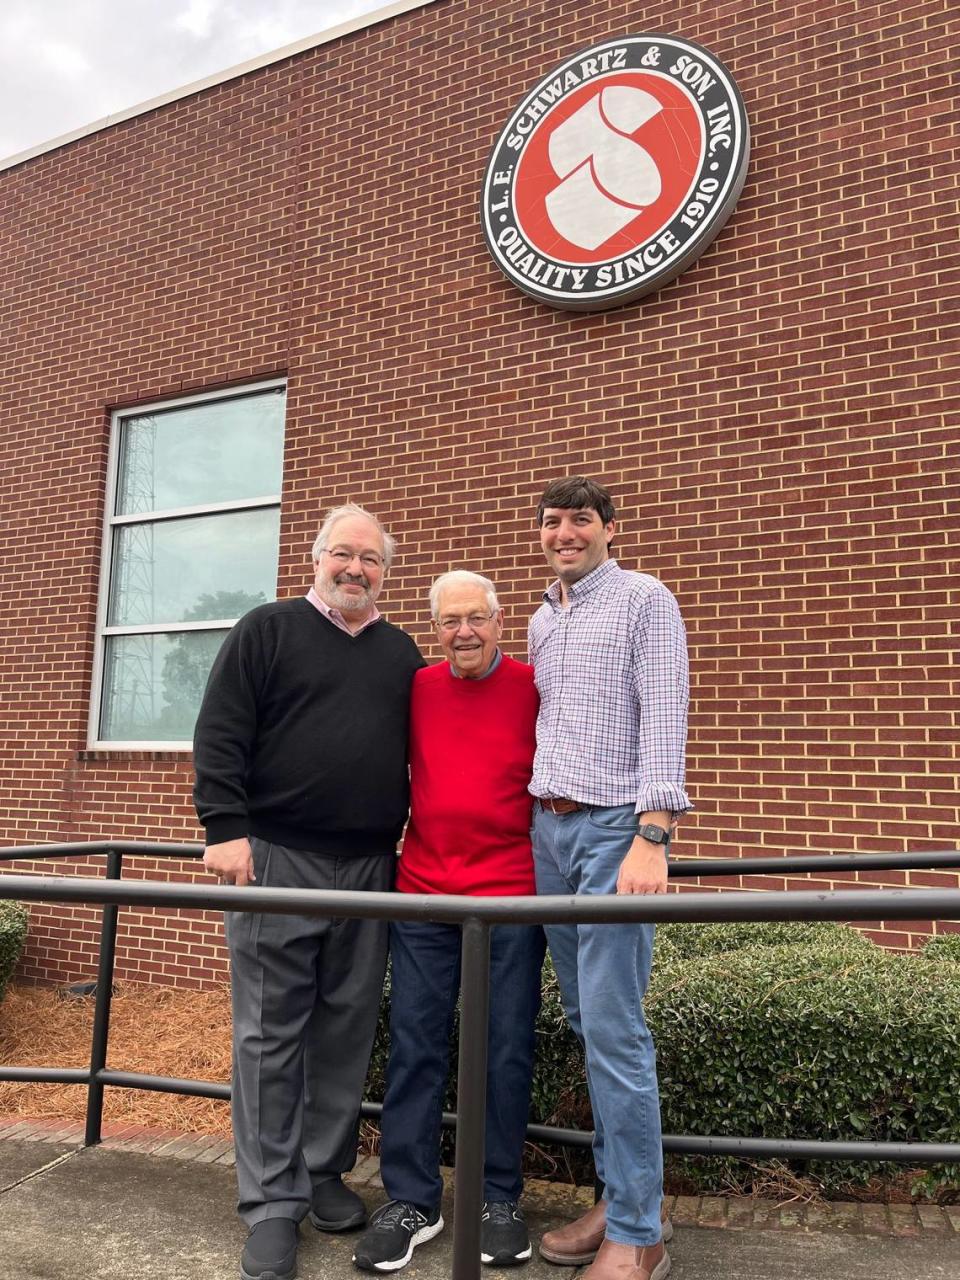 (From left) Steve Kruger, Melvin Kruger, and Michael Kruger smile for a photo in front of their family business L.E. Schwartz. The business has been a Macon staple since 1910. Courtesy Michael Kruger